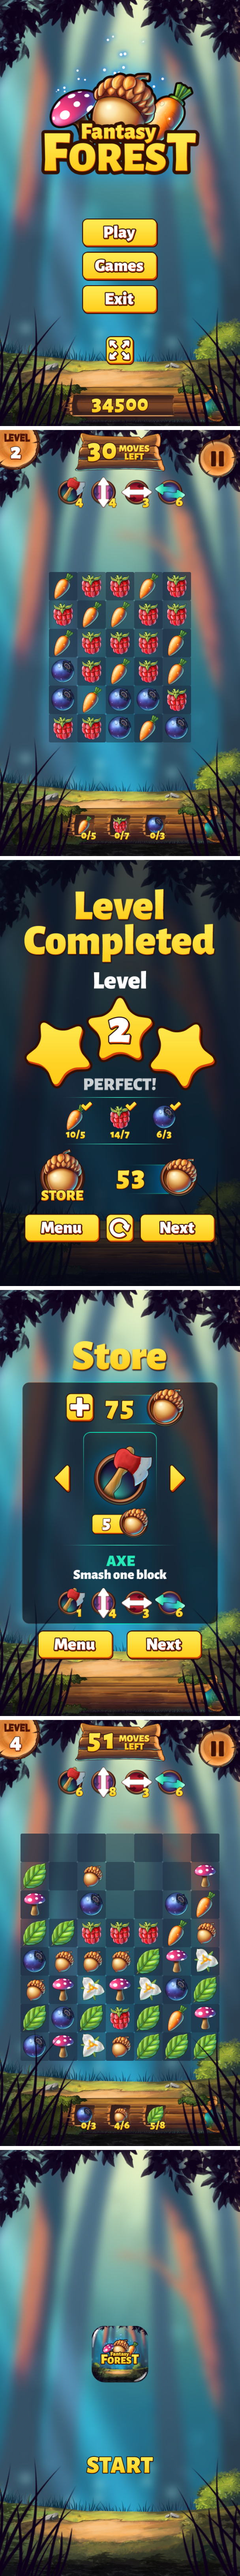 Fantasy Forest - HTML5 + Mobile Game (Construct 3) - 3